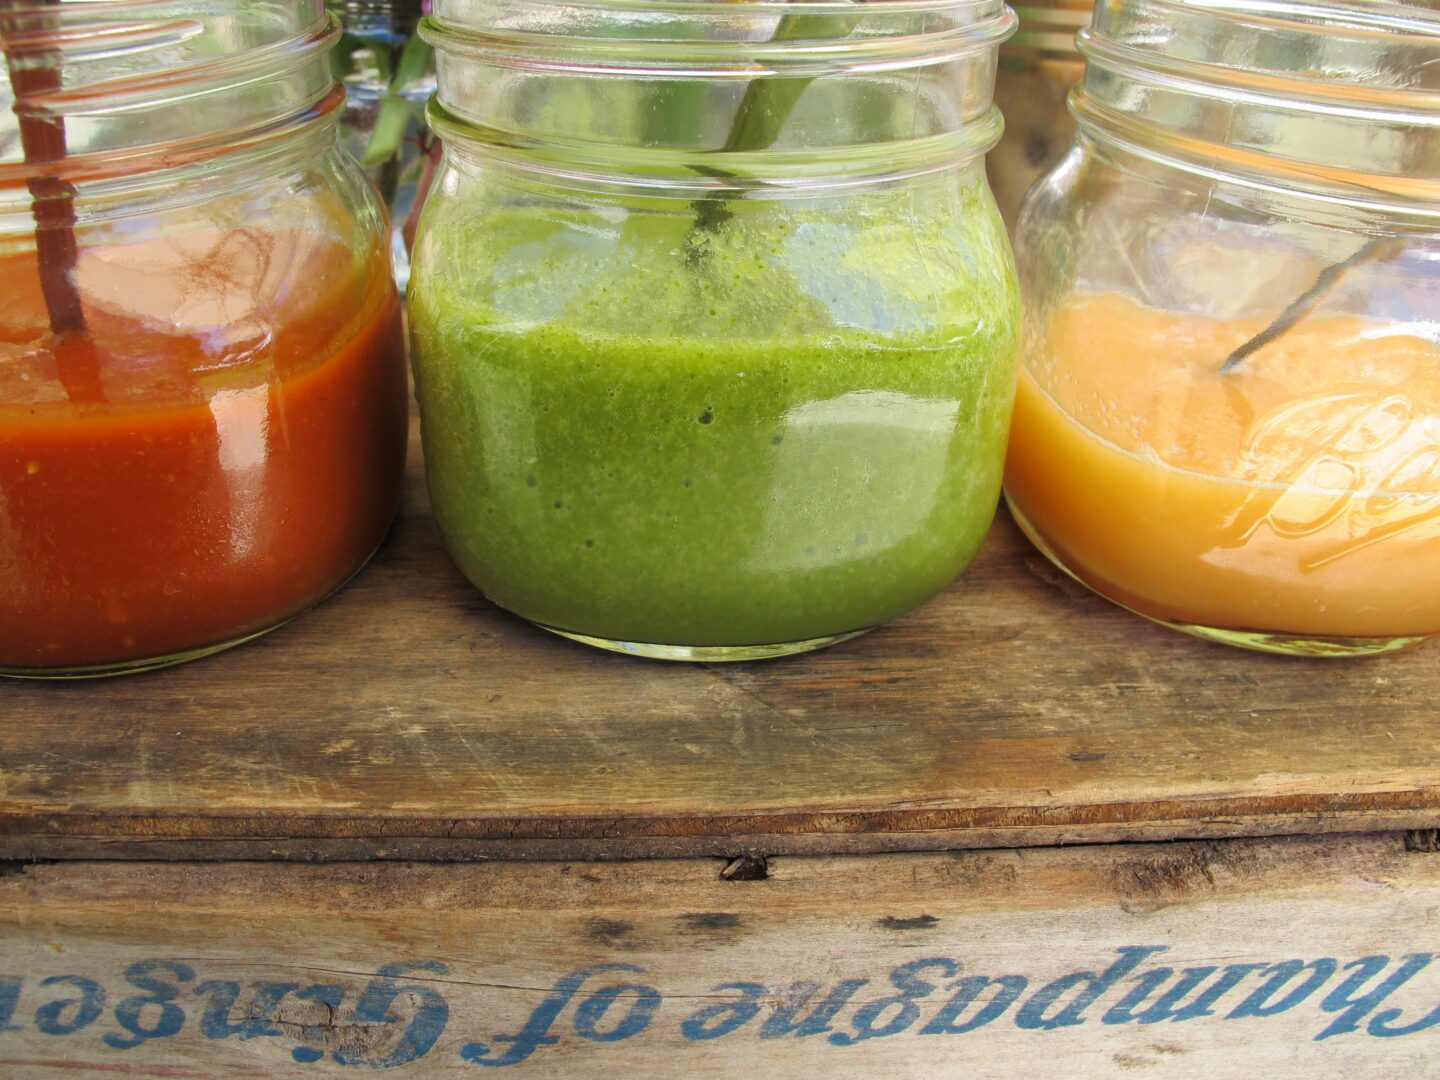 Four mason jars filled with different kinds of juices.